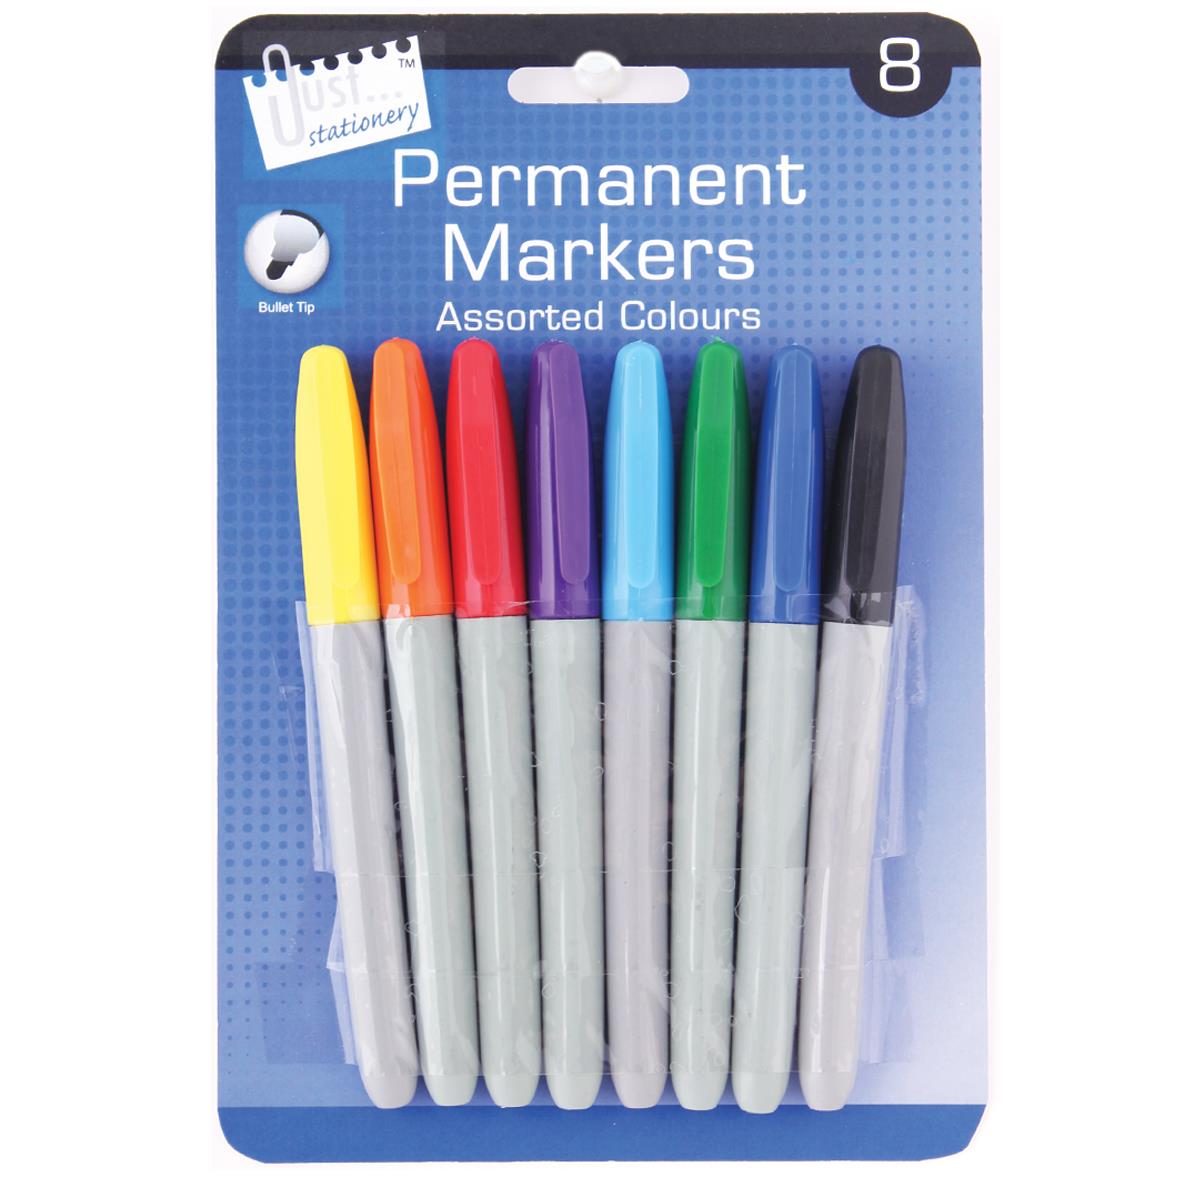 Pack of 8 Bullet Tip Permanent Markers in Assorted Colours